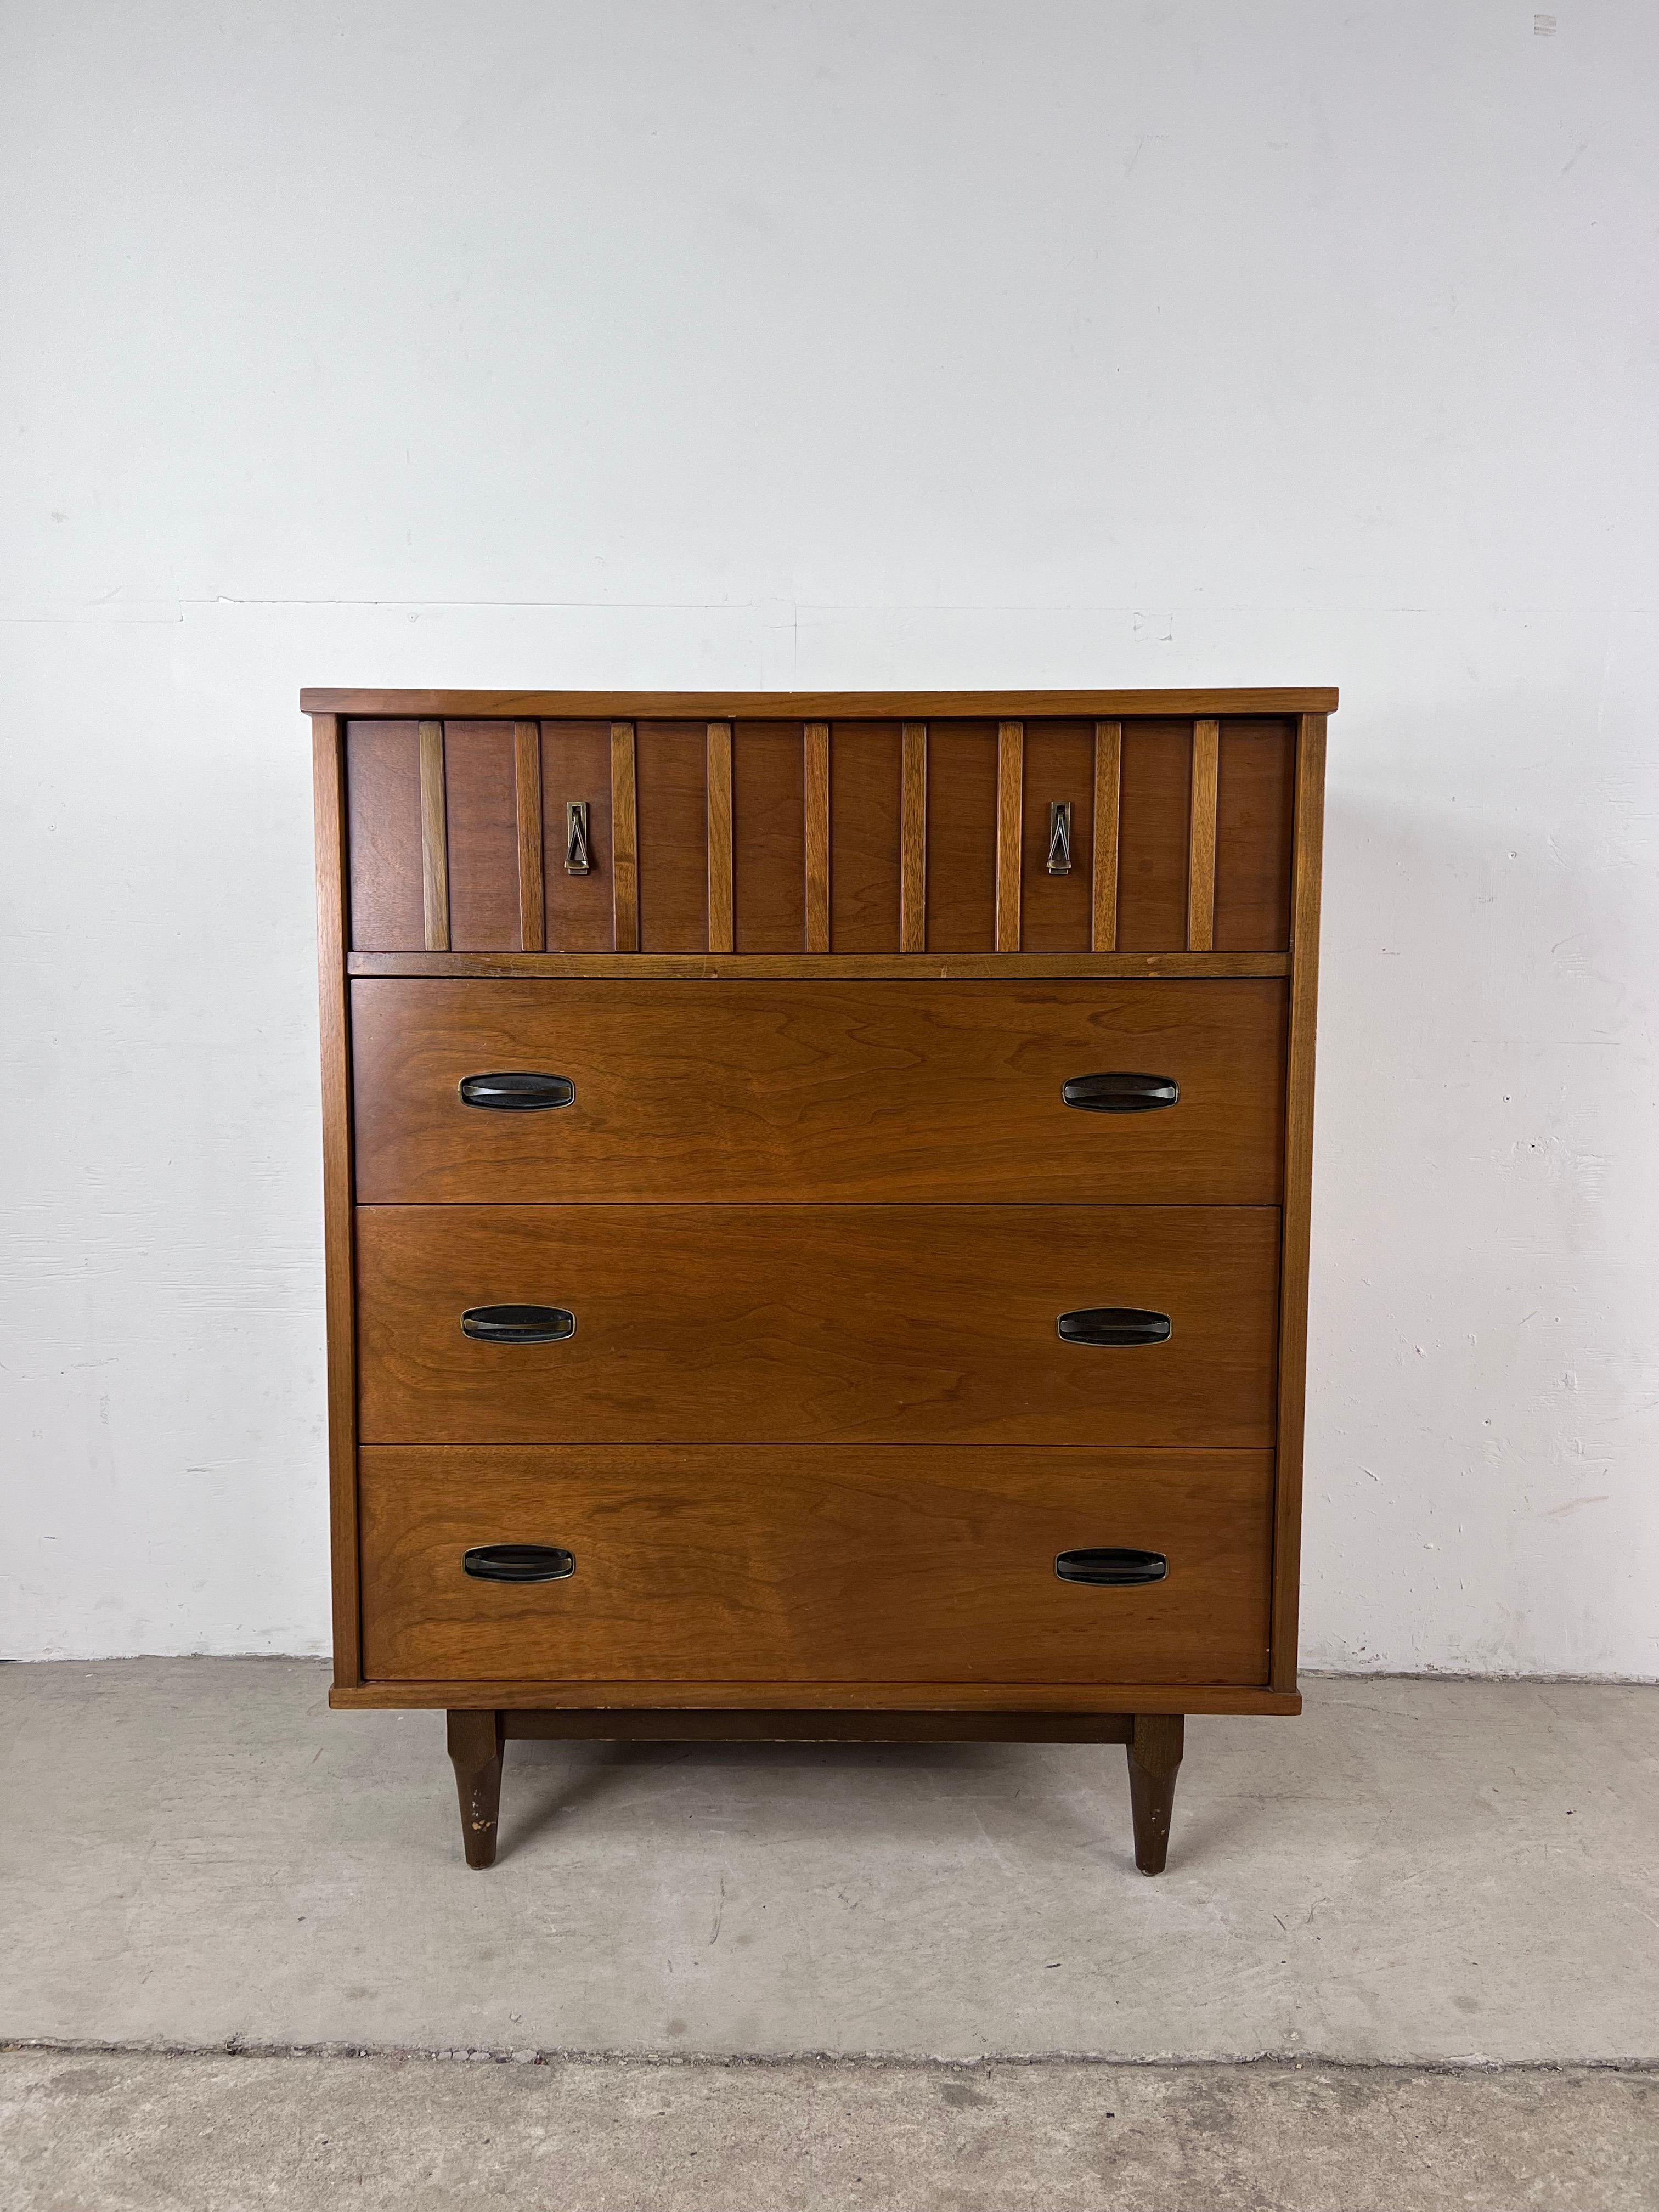 This Mid-Century Modern highboy dresser by Krug features hardwood construction, walnut veneer with original finish, four dovetailed drawers with brass hardware, and tapered legs.??

Dimensions: 34 W 18 D 41.75 H.

